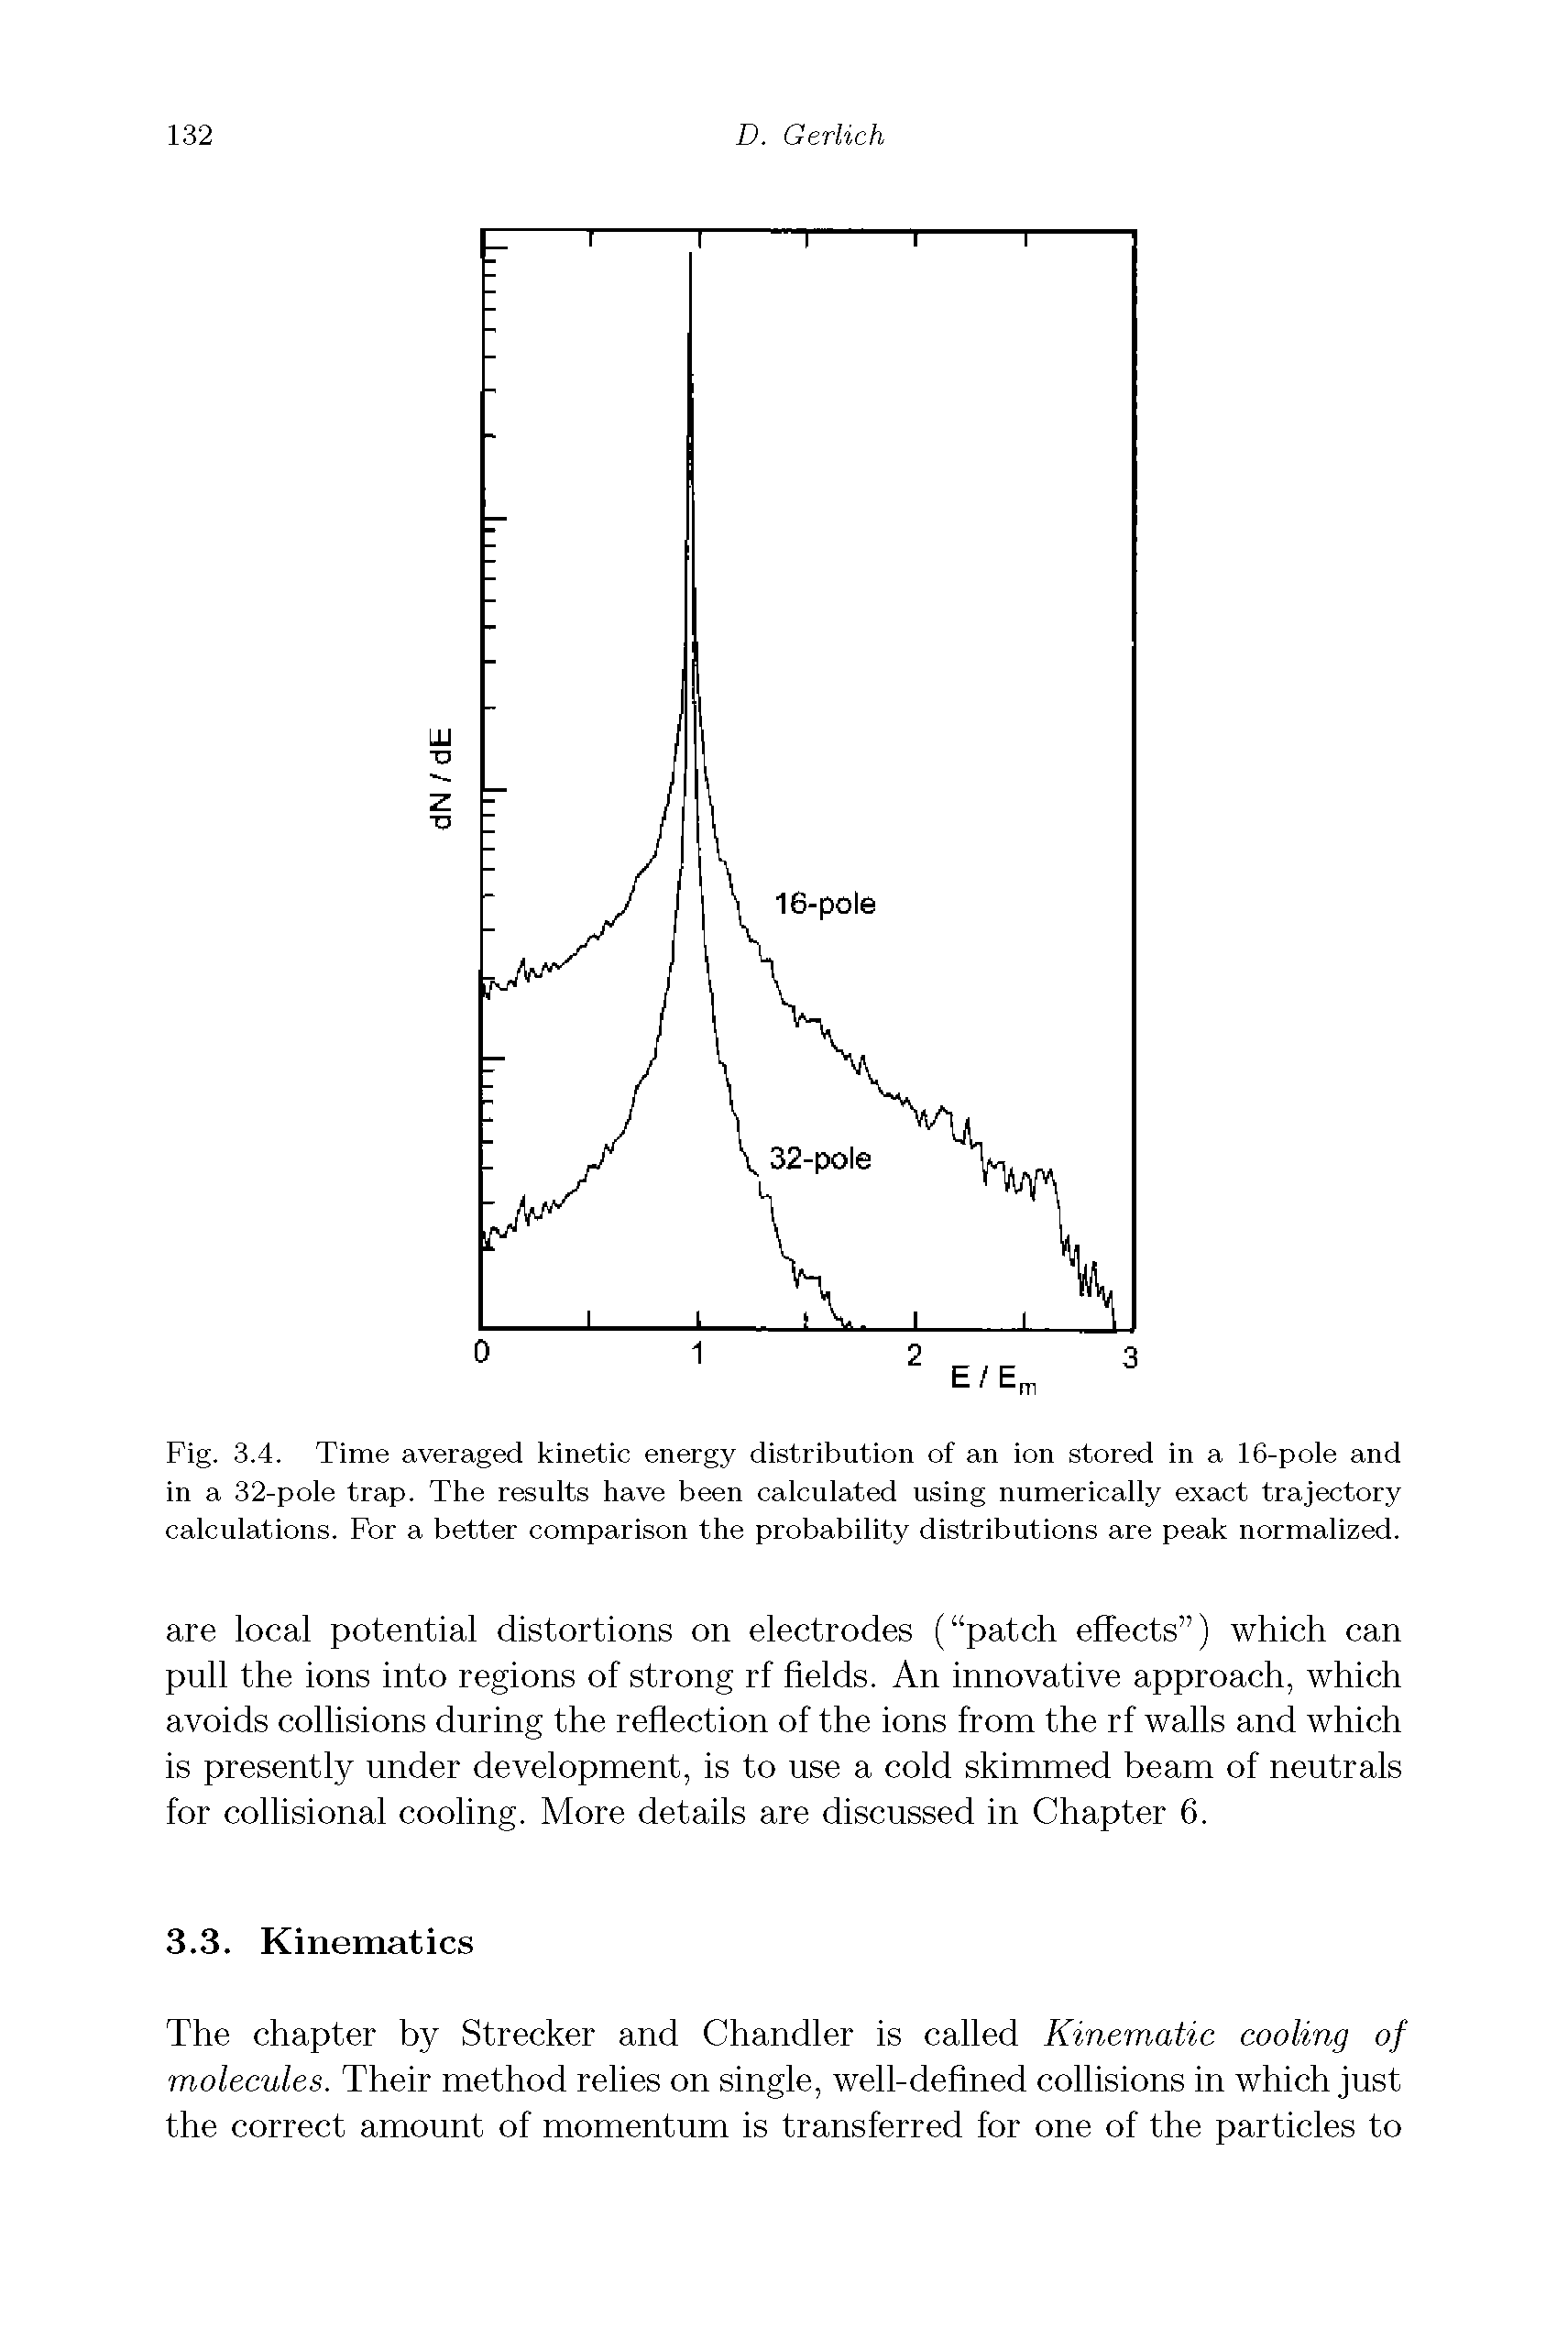 Fig. 3.4. Time averaged kinetic energy distribution of an ion stored in a 16-pole and in a 32-pole trap. The results have been calculated using numerically exact trajectory calculations. For a better comparison the probability distributions are peak normalized.